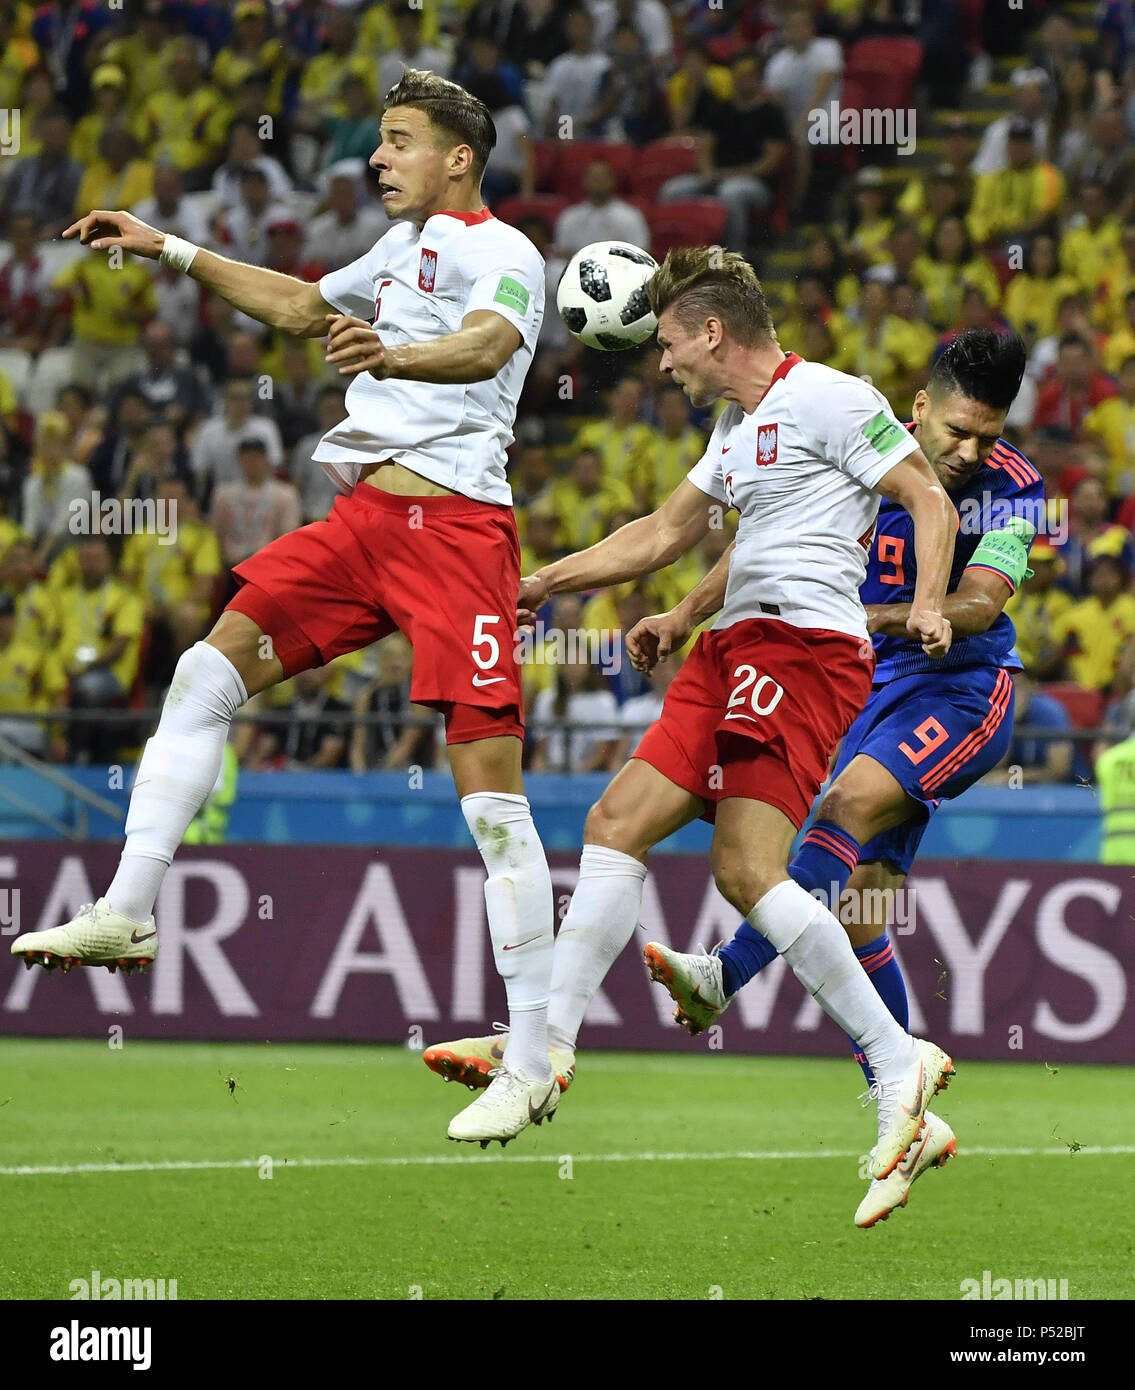 Kazan, Russia. 24th June, 2018. Radamel Falcao (R) of Colombia competes for a header with Lukasz Piszcek (C) and Jan Bednarek of Poland during the 2018 FIFA World Cup Group H match between Poland and Colombia in Kazan, Russia, June 24, 2018. Credit: He Canling/Xinhua/Alamy Live News Stock Photo